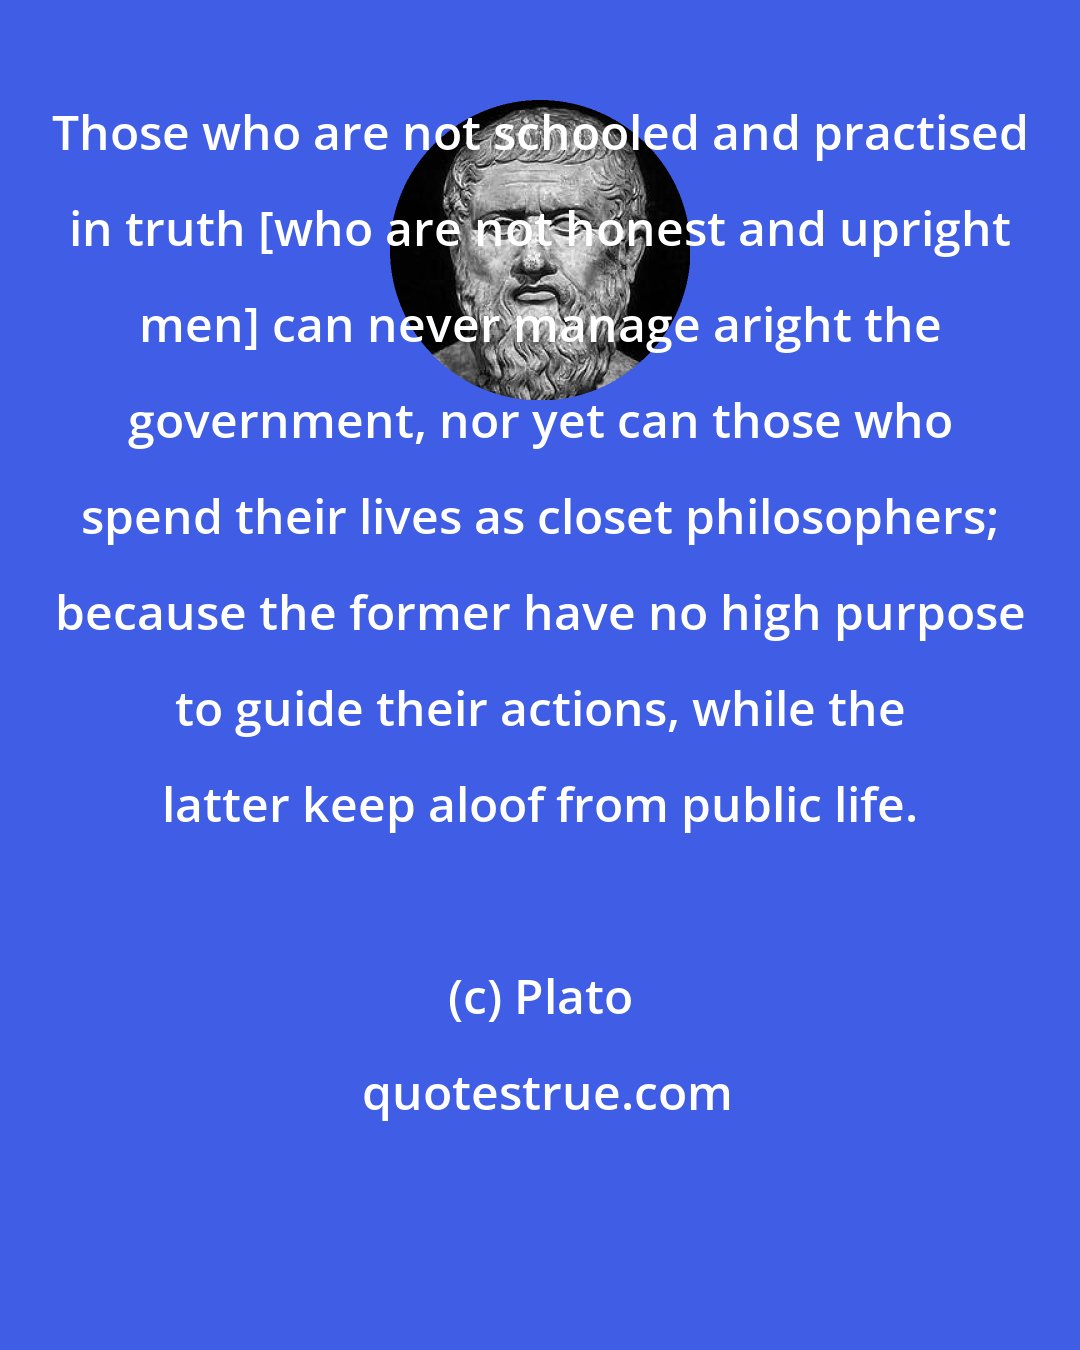 Plato: Those who are not schooled and practised in truth [who are not honest and upright men] can never manage aright the government, nor yet can those who spend their lives as closet philosophers; because the former have no high purpose to guide their actions, while the latter keep aloof from public life.